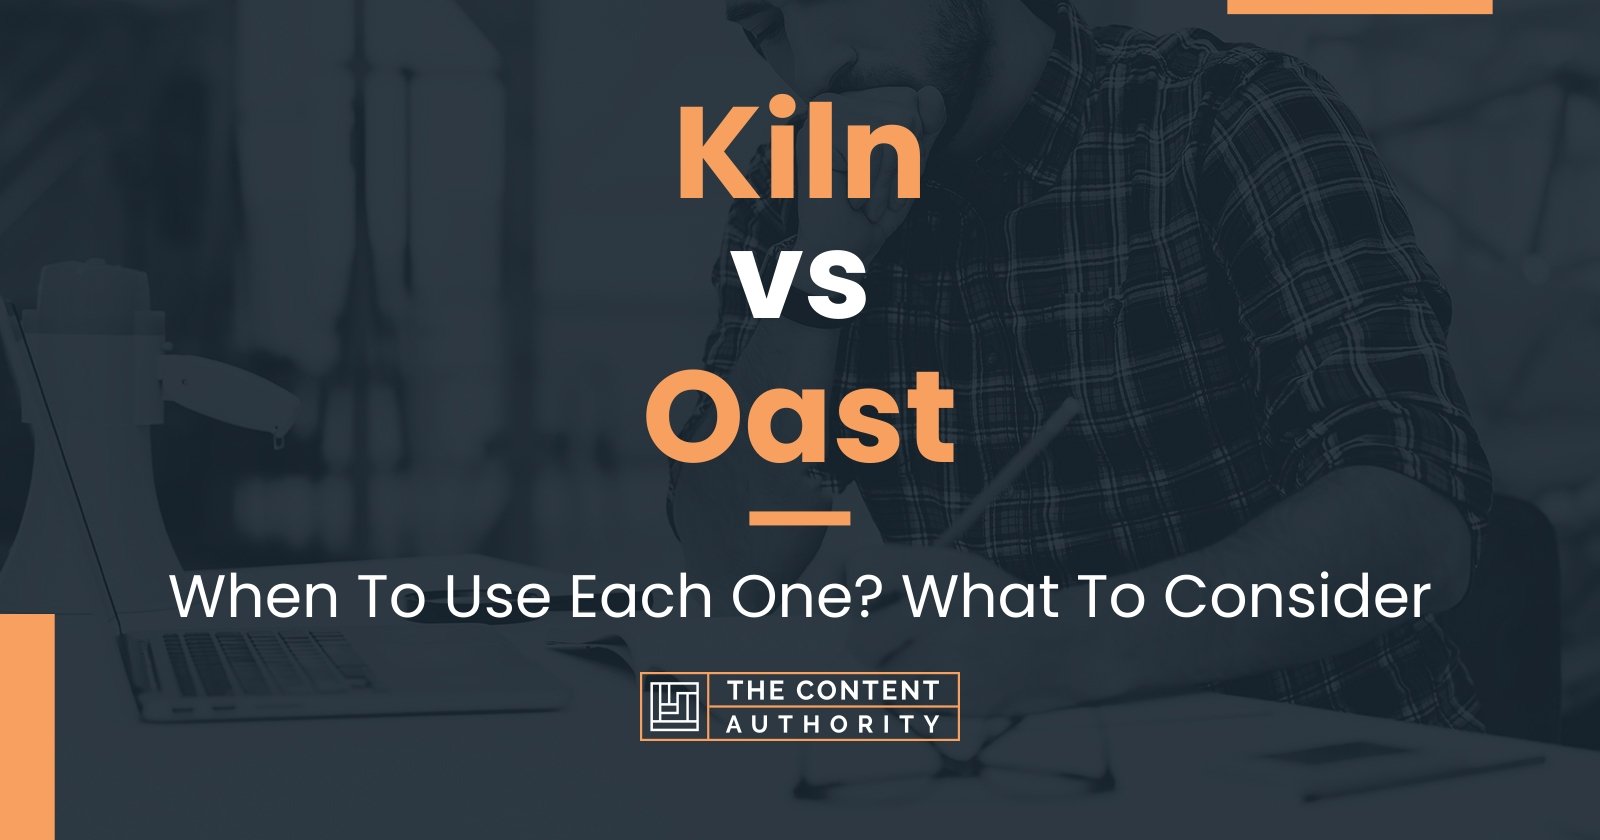 Kiln vs Oast: When To Use Each One? What To Consider